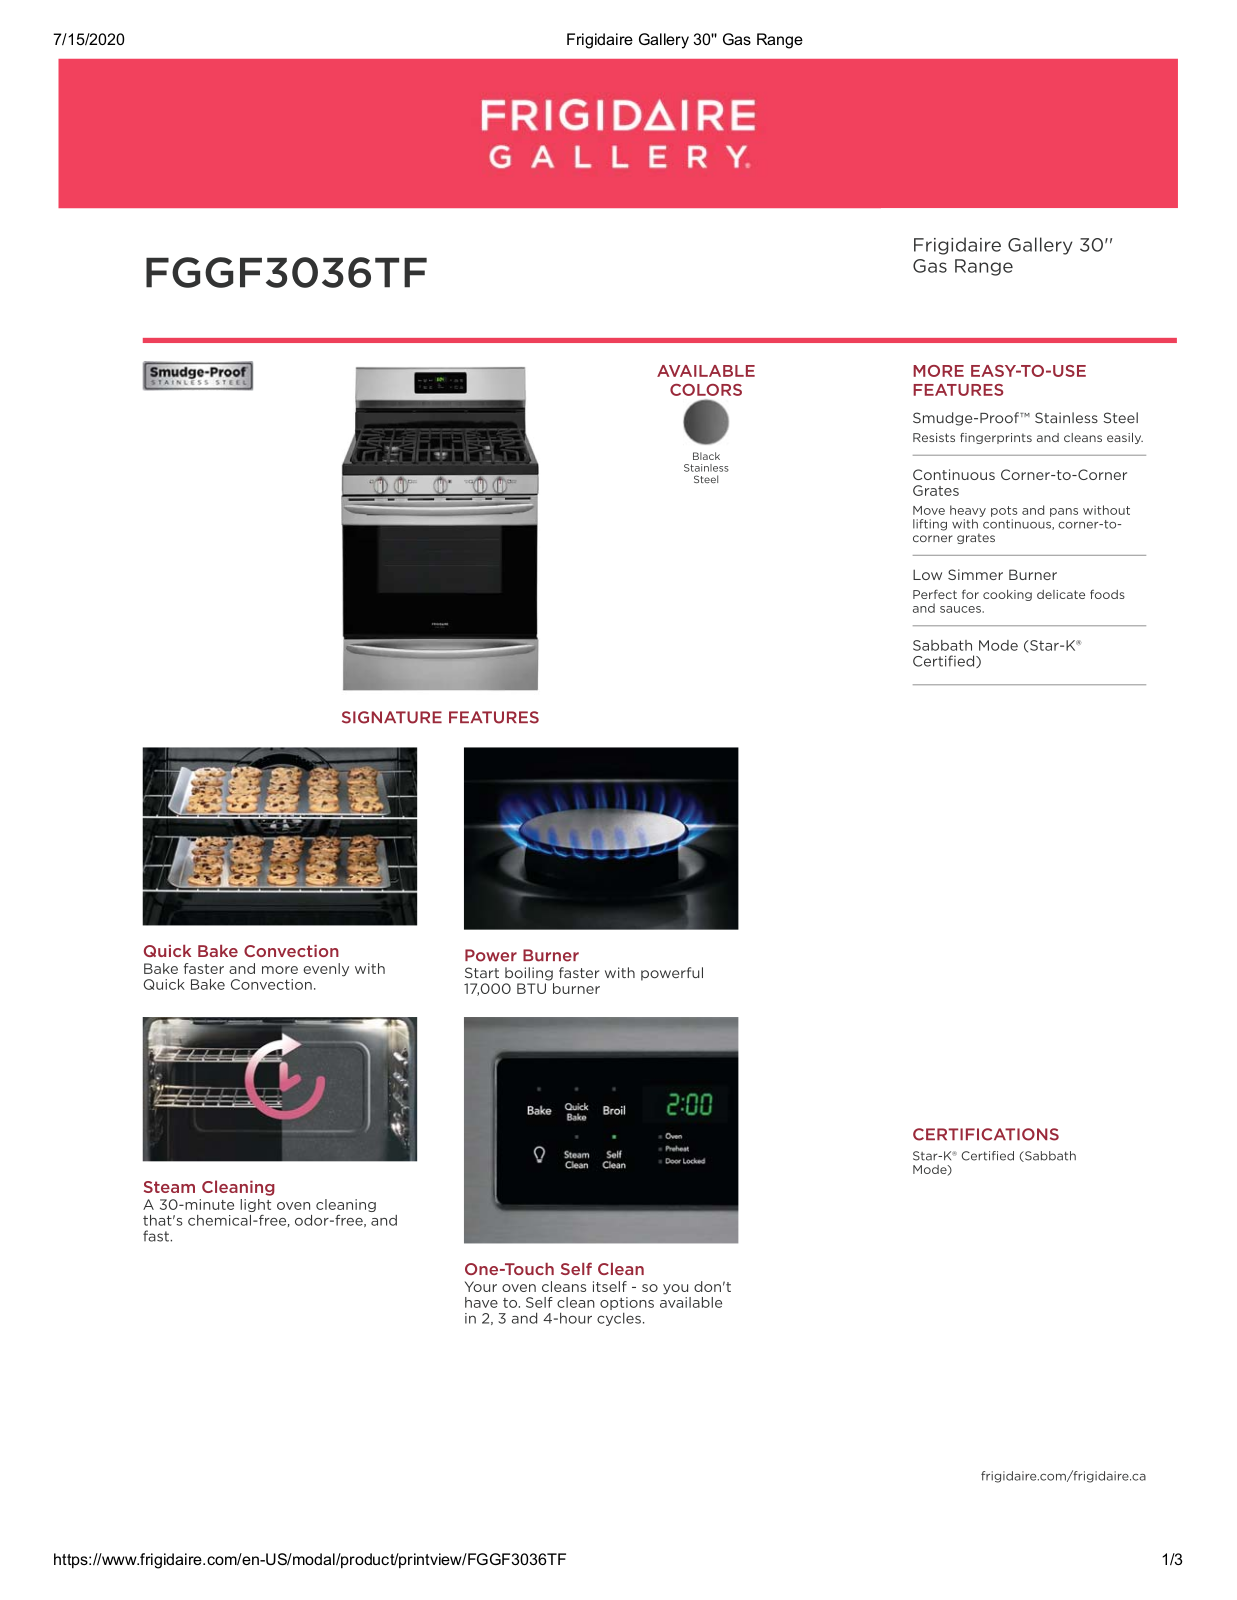 Frigidaire FGGF3036TF Specifications